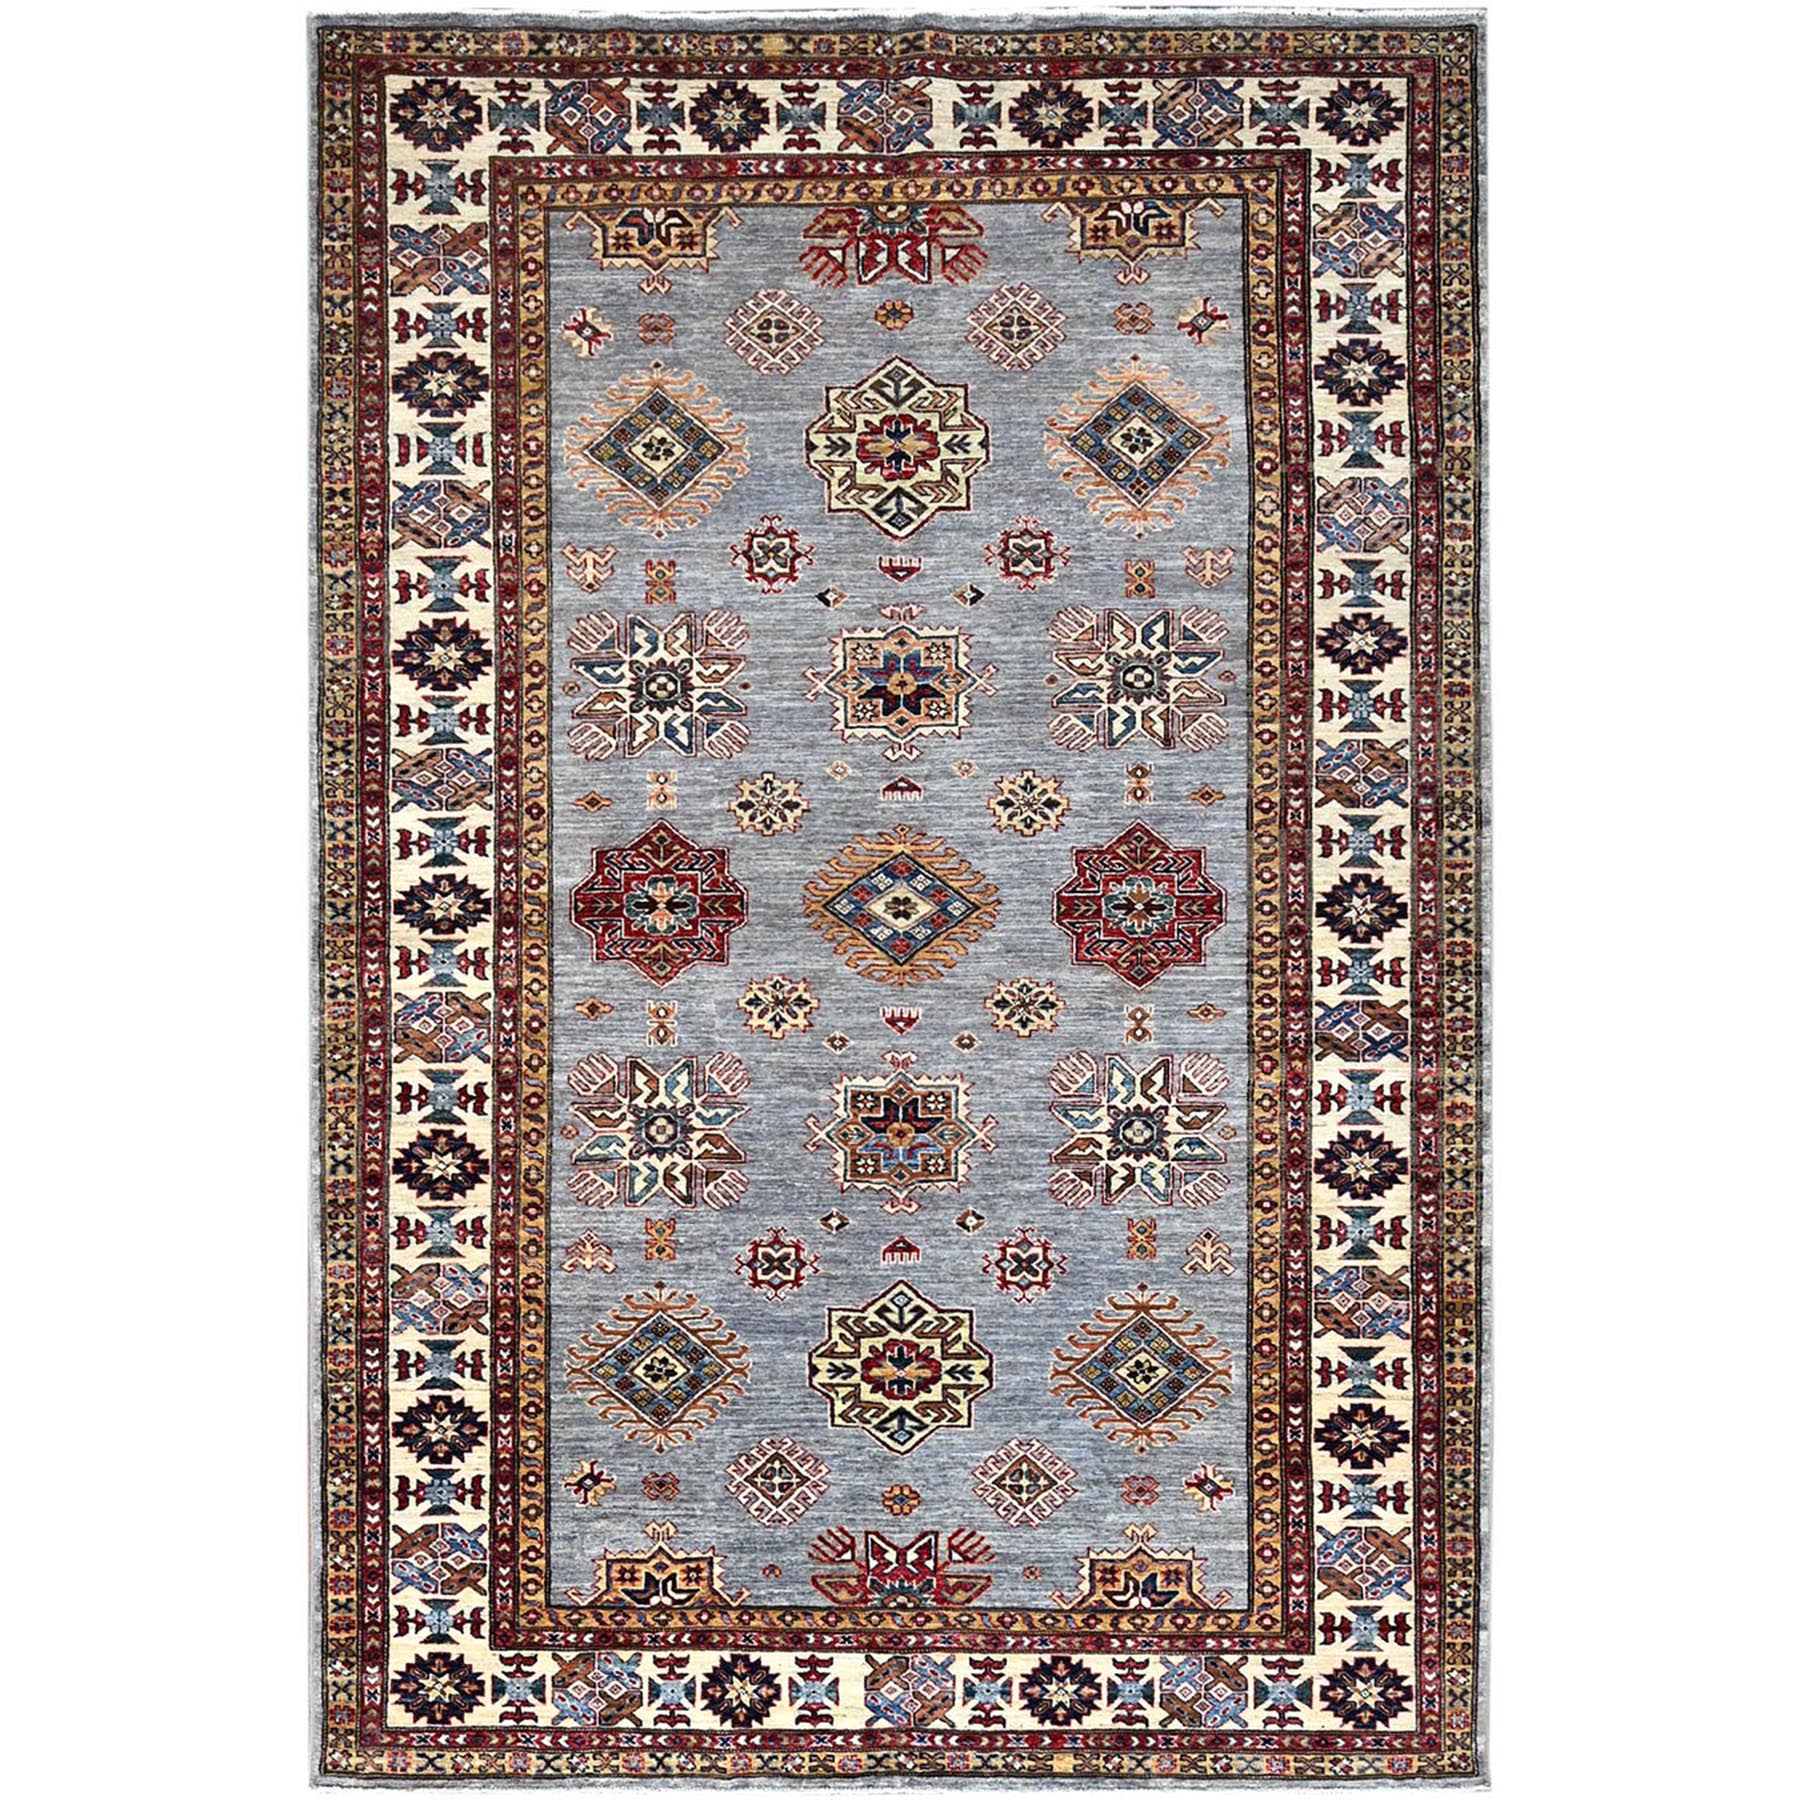 Quiet Gray, Soft, Velvety Wool Hand Knotted Afghan Super Kazak with Medallions Design Densely Woven Oriental Rug